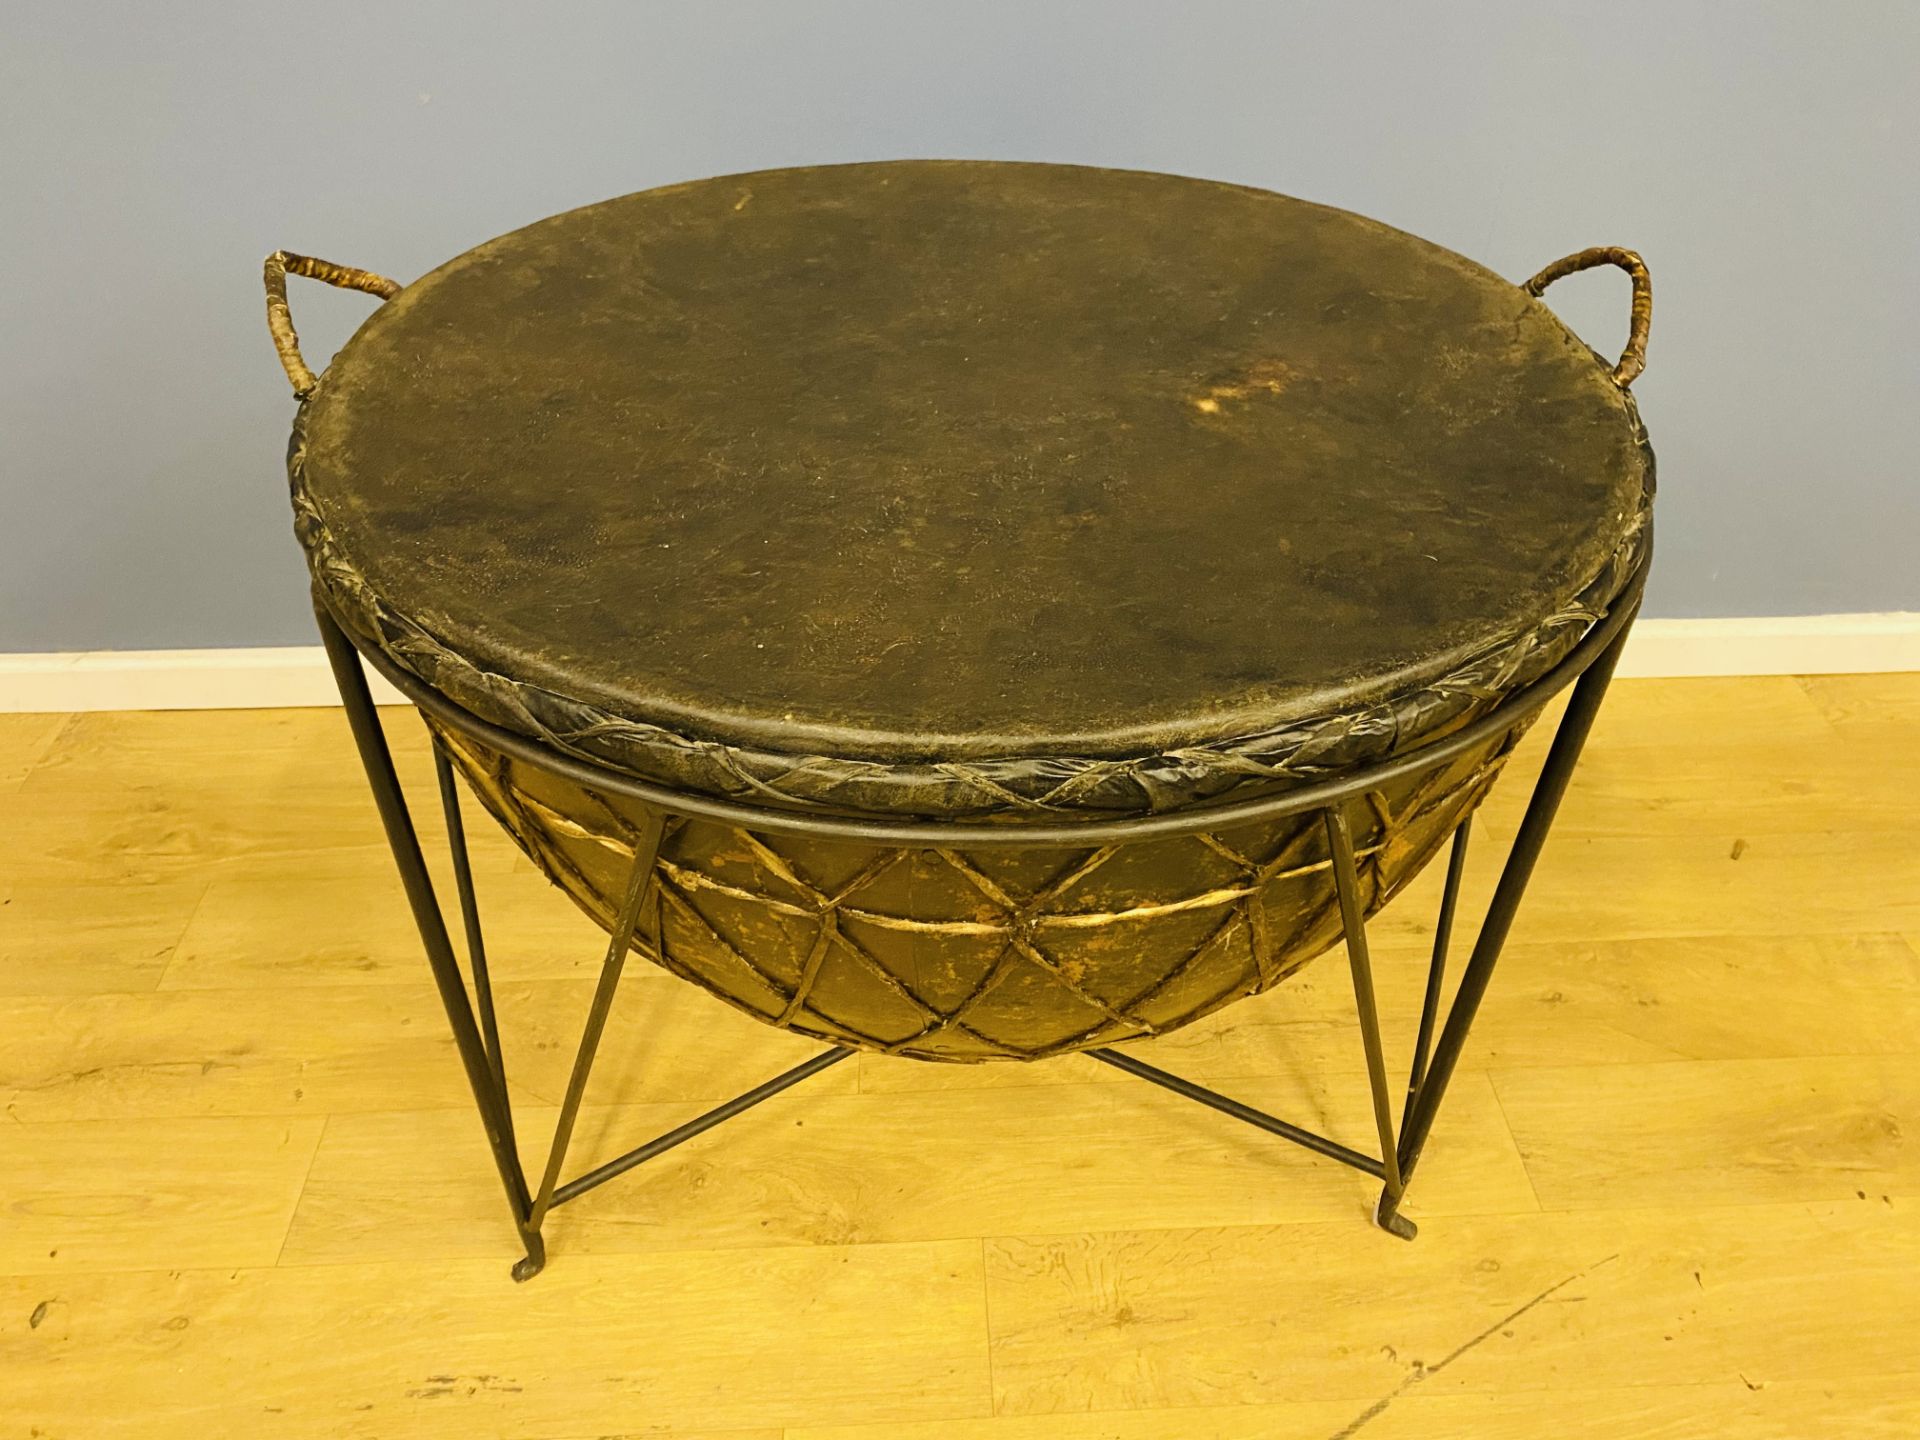 Contemporary African drum on metal stand - Image 6 of 6